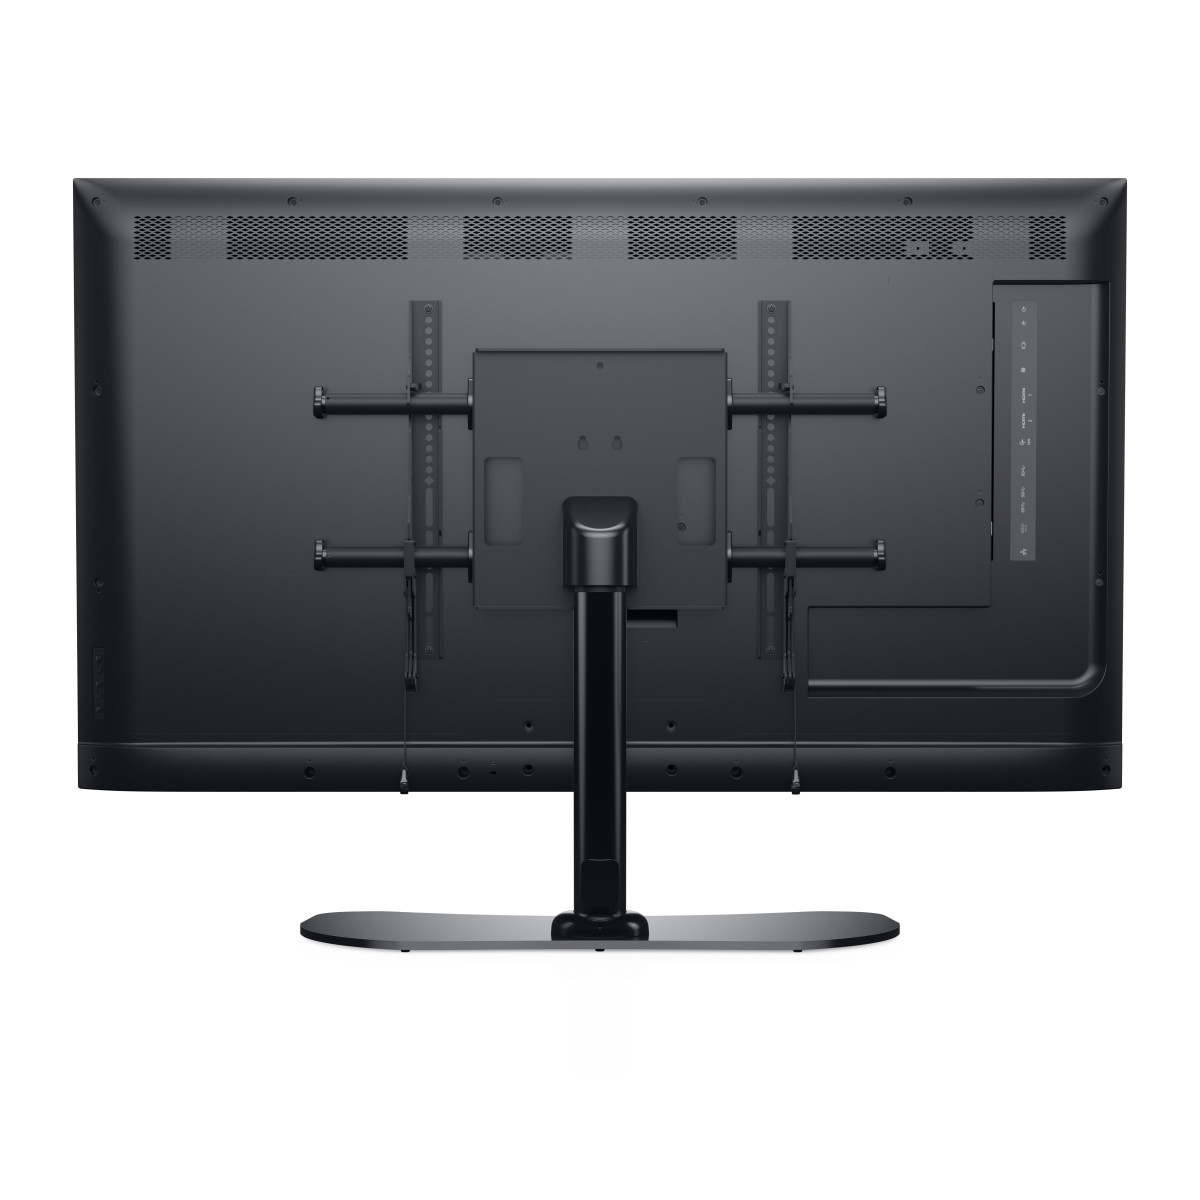 P5524Q 55 4K Conference Room Monitor